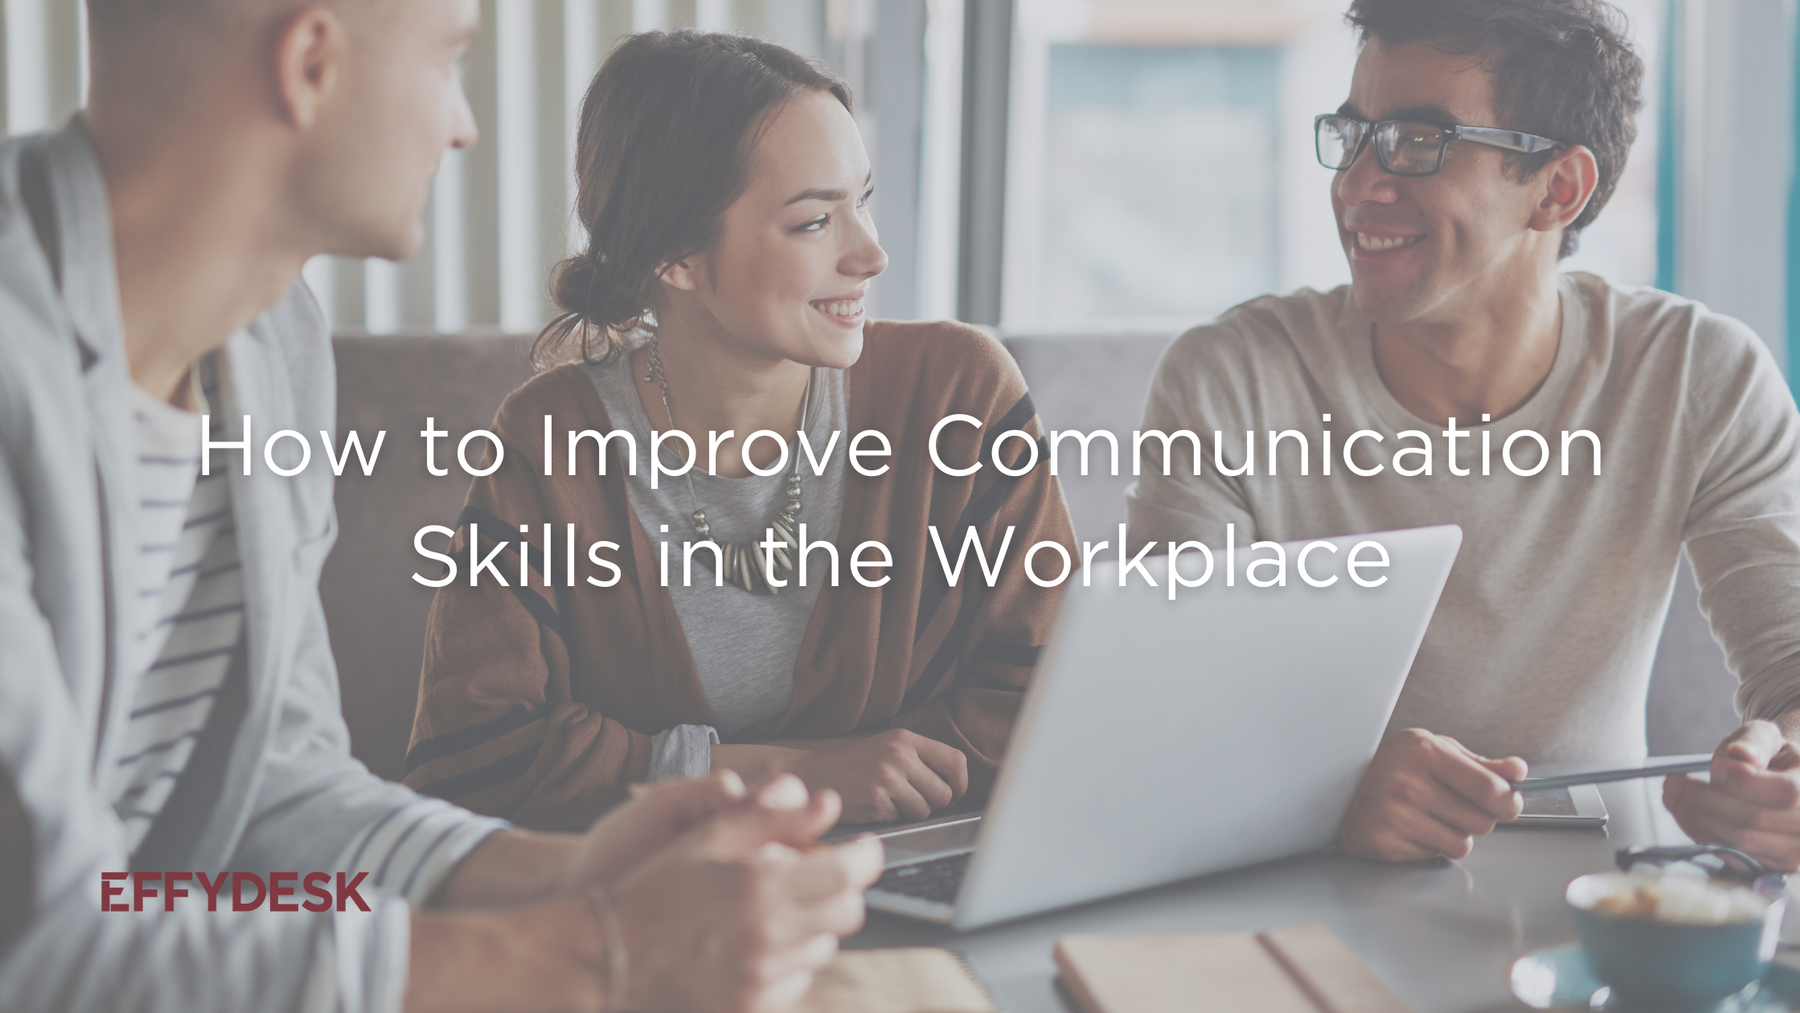 Learn how to improve communication skills in the workplace